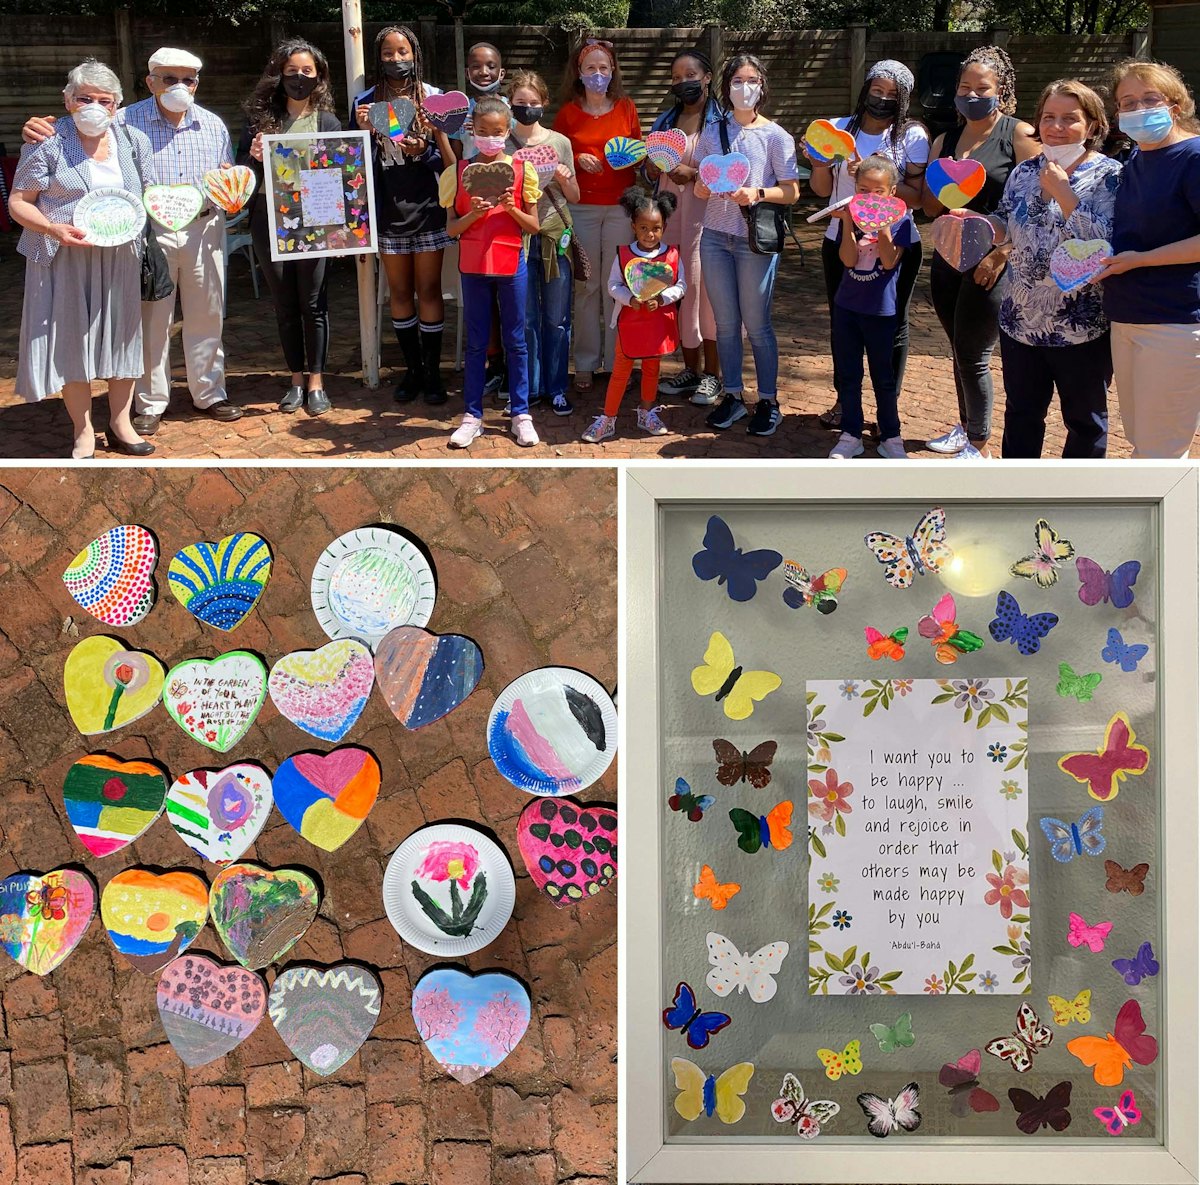 Participants of Bahá’í community-building activities in South Africa created these artistic pieces, which were inspire by stories from ‘Abdu’l-Bahá’s life on the themes of selfless service to humanity and love.